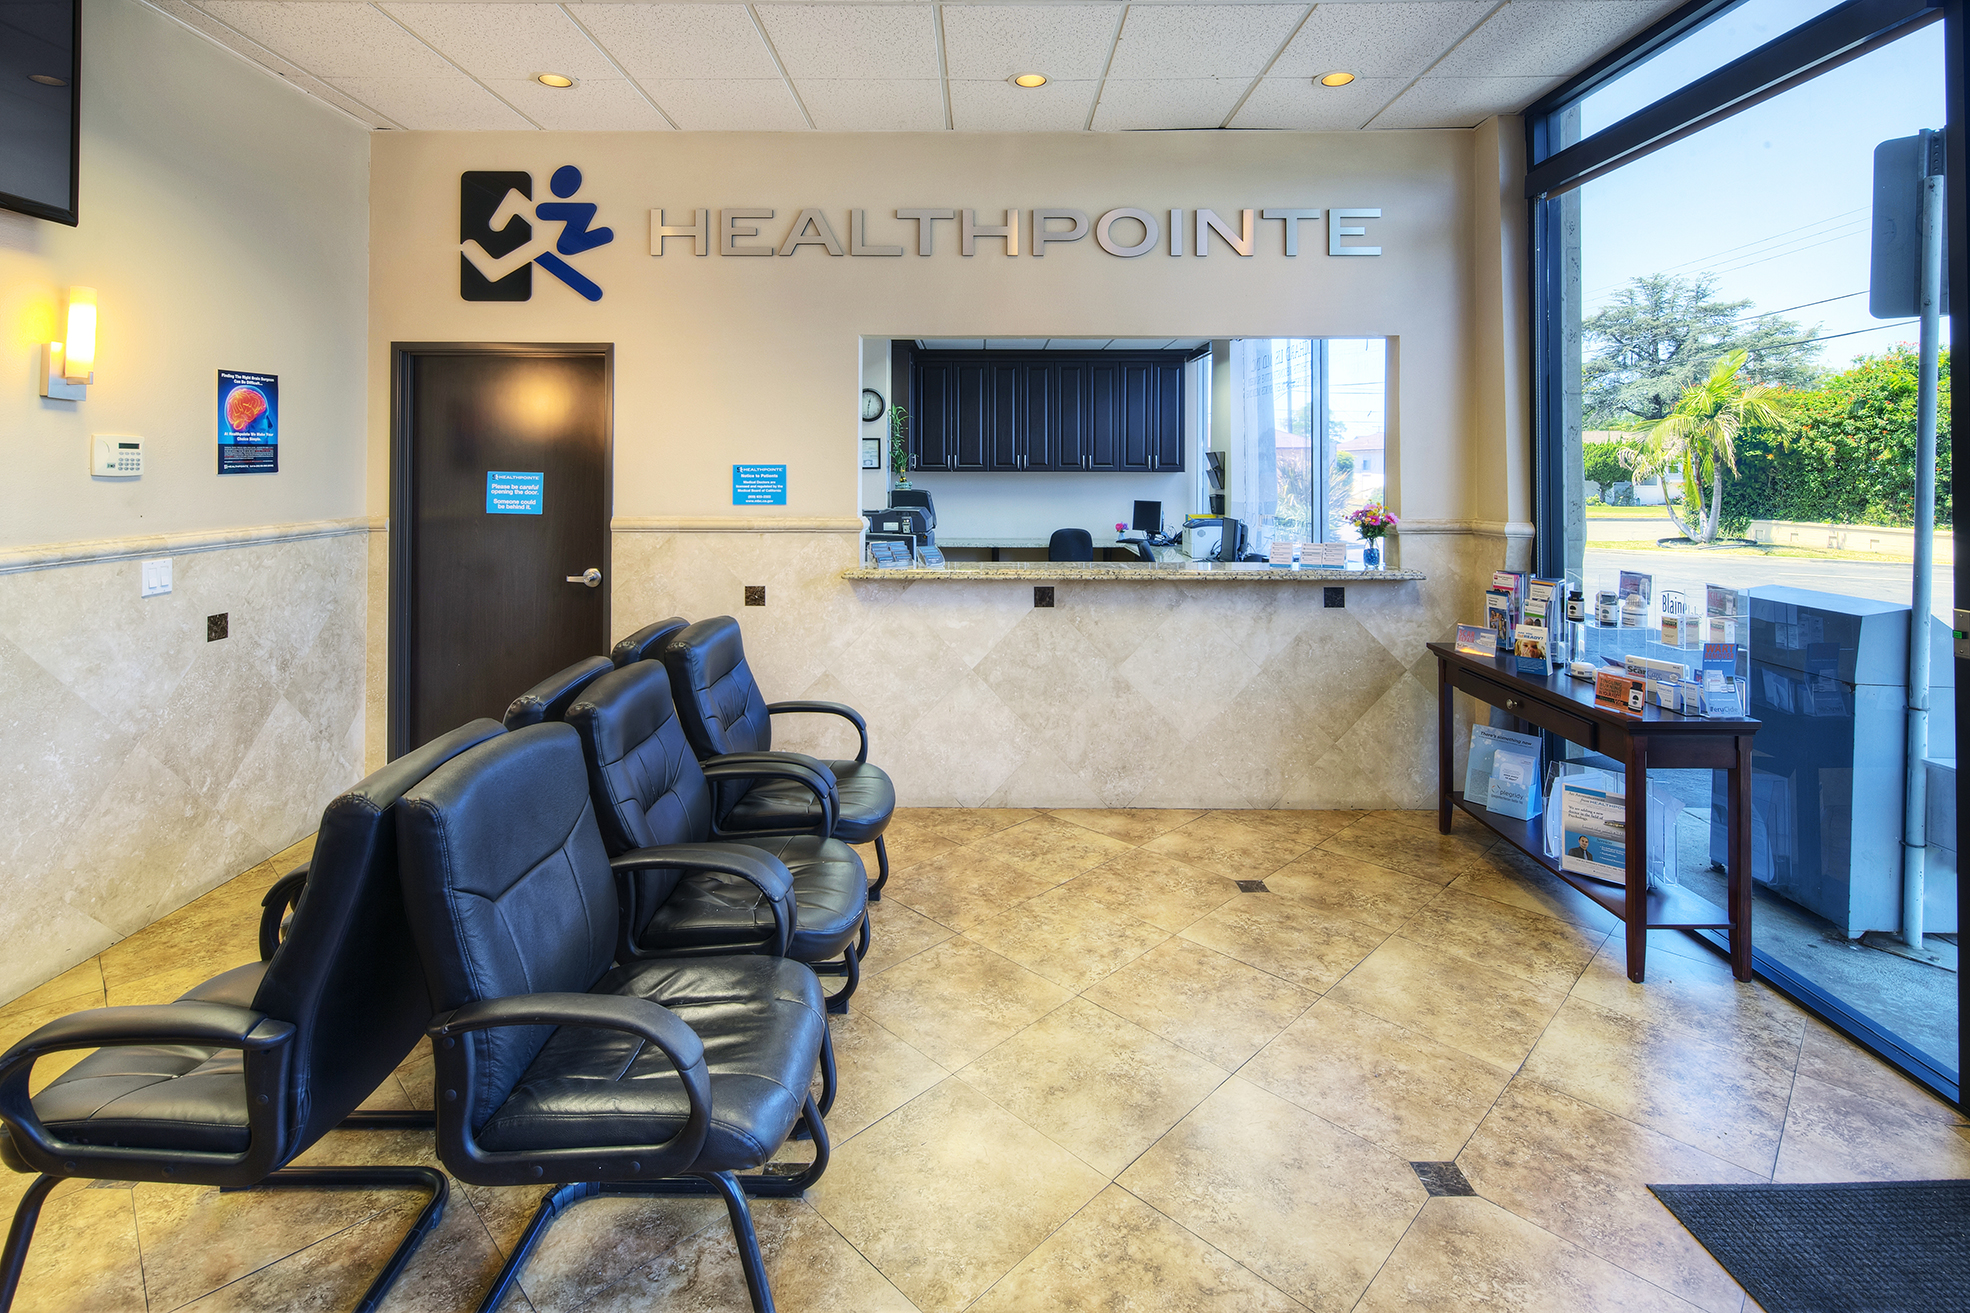 The Covid Recovery Program at Healthpointe in Anaheim